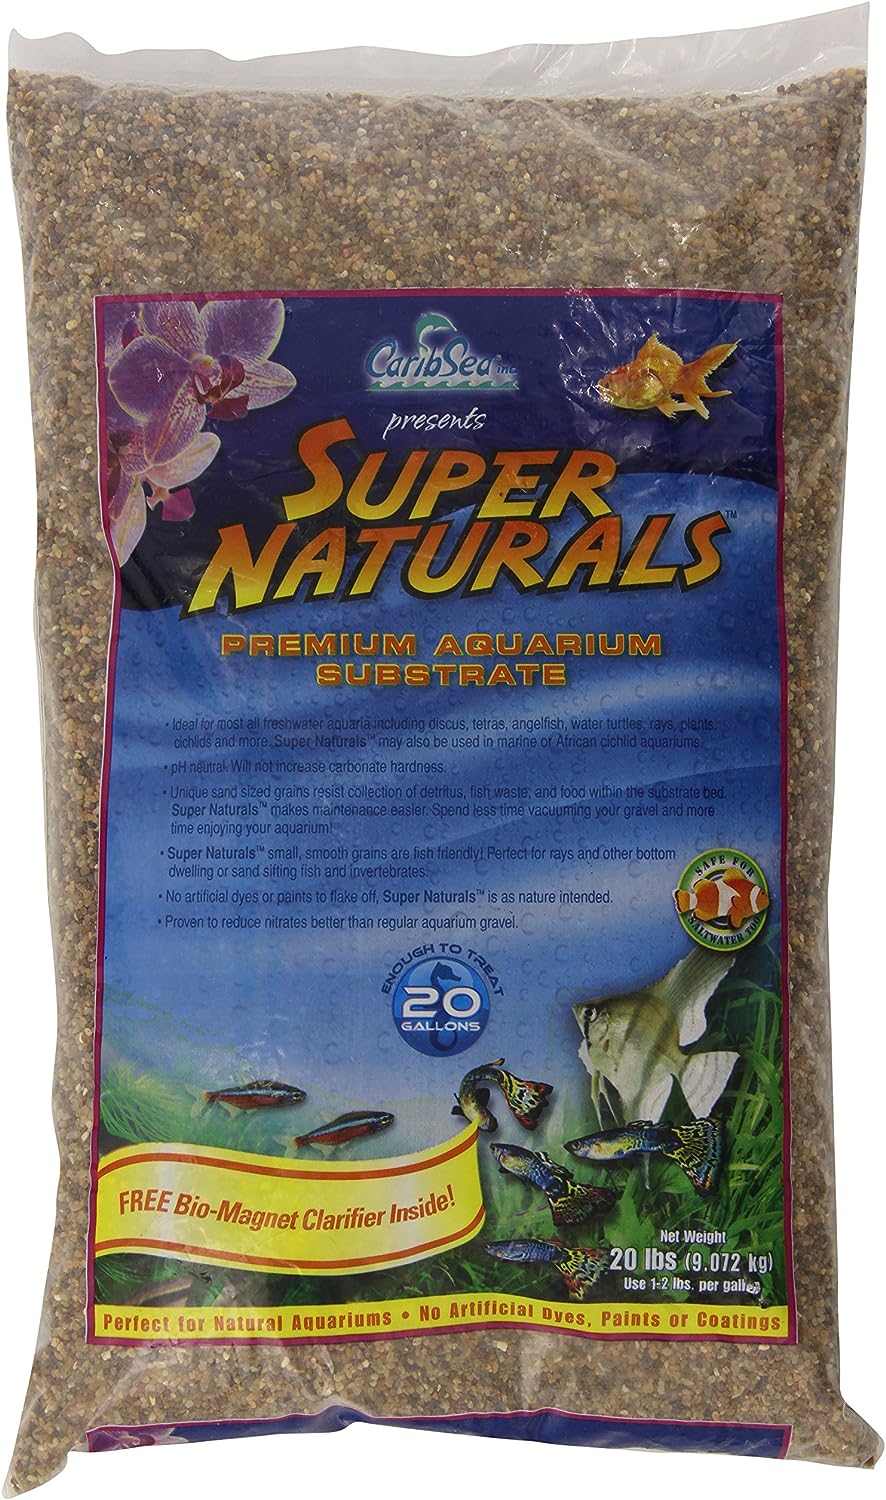 (20lbs) CaribSea Super Naturals Jungle River Freshwater Substrate